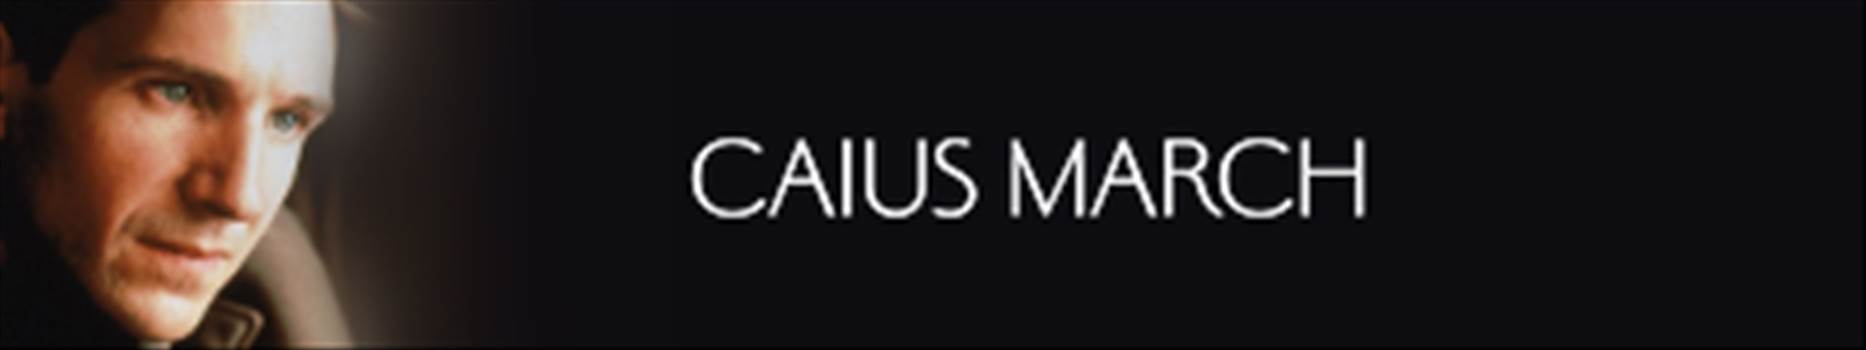 CAIUS-TRACKER.png - 